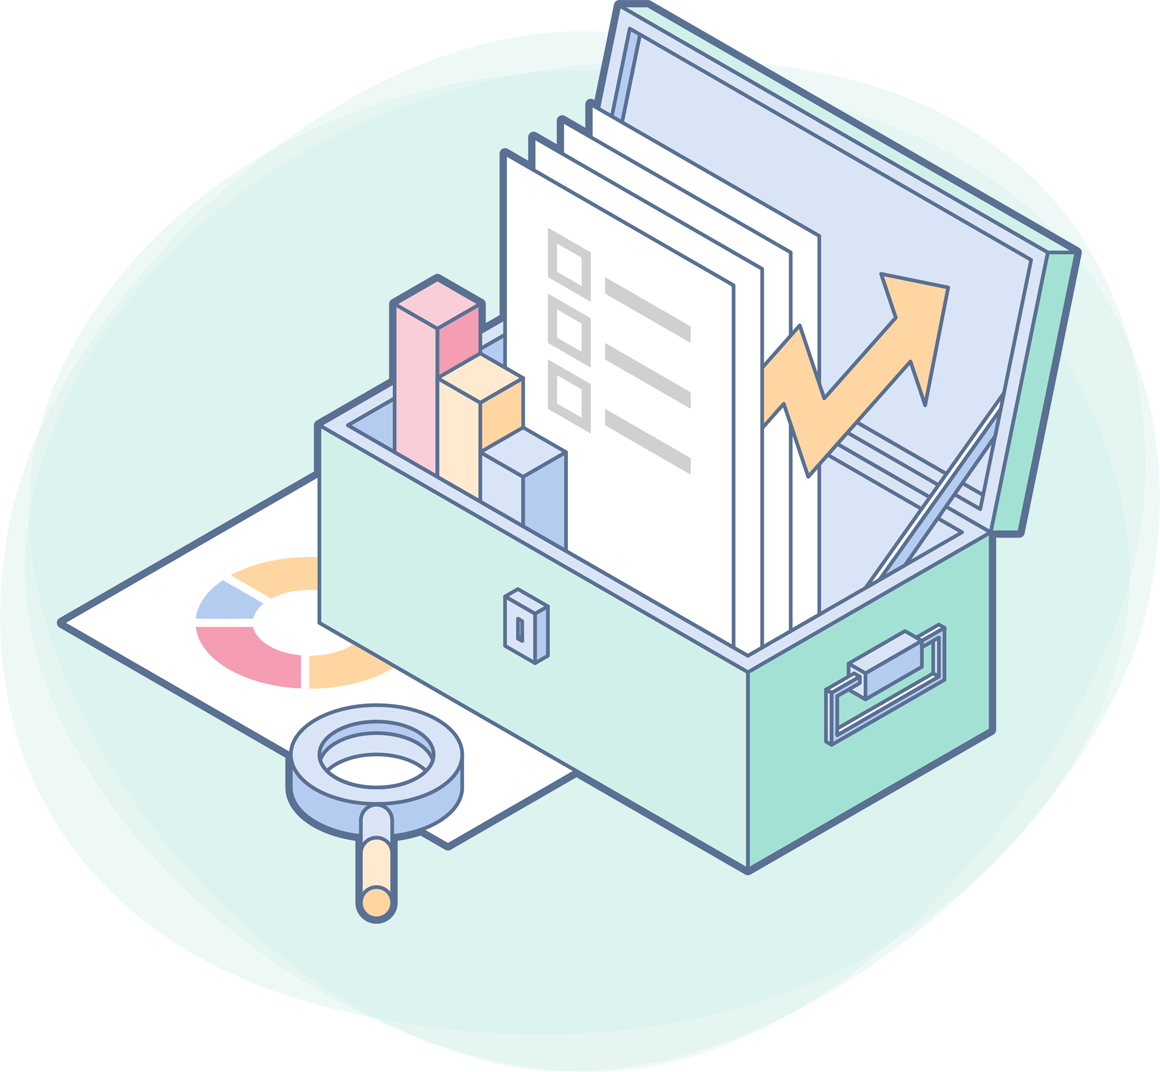 SurveyJS offers a set of tools needed to build a self-hosted form management system within one's own inhouse infrustructure.